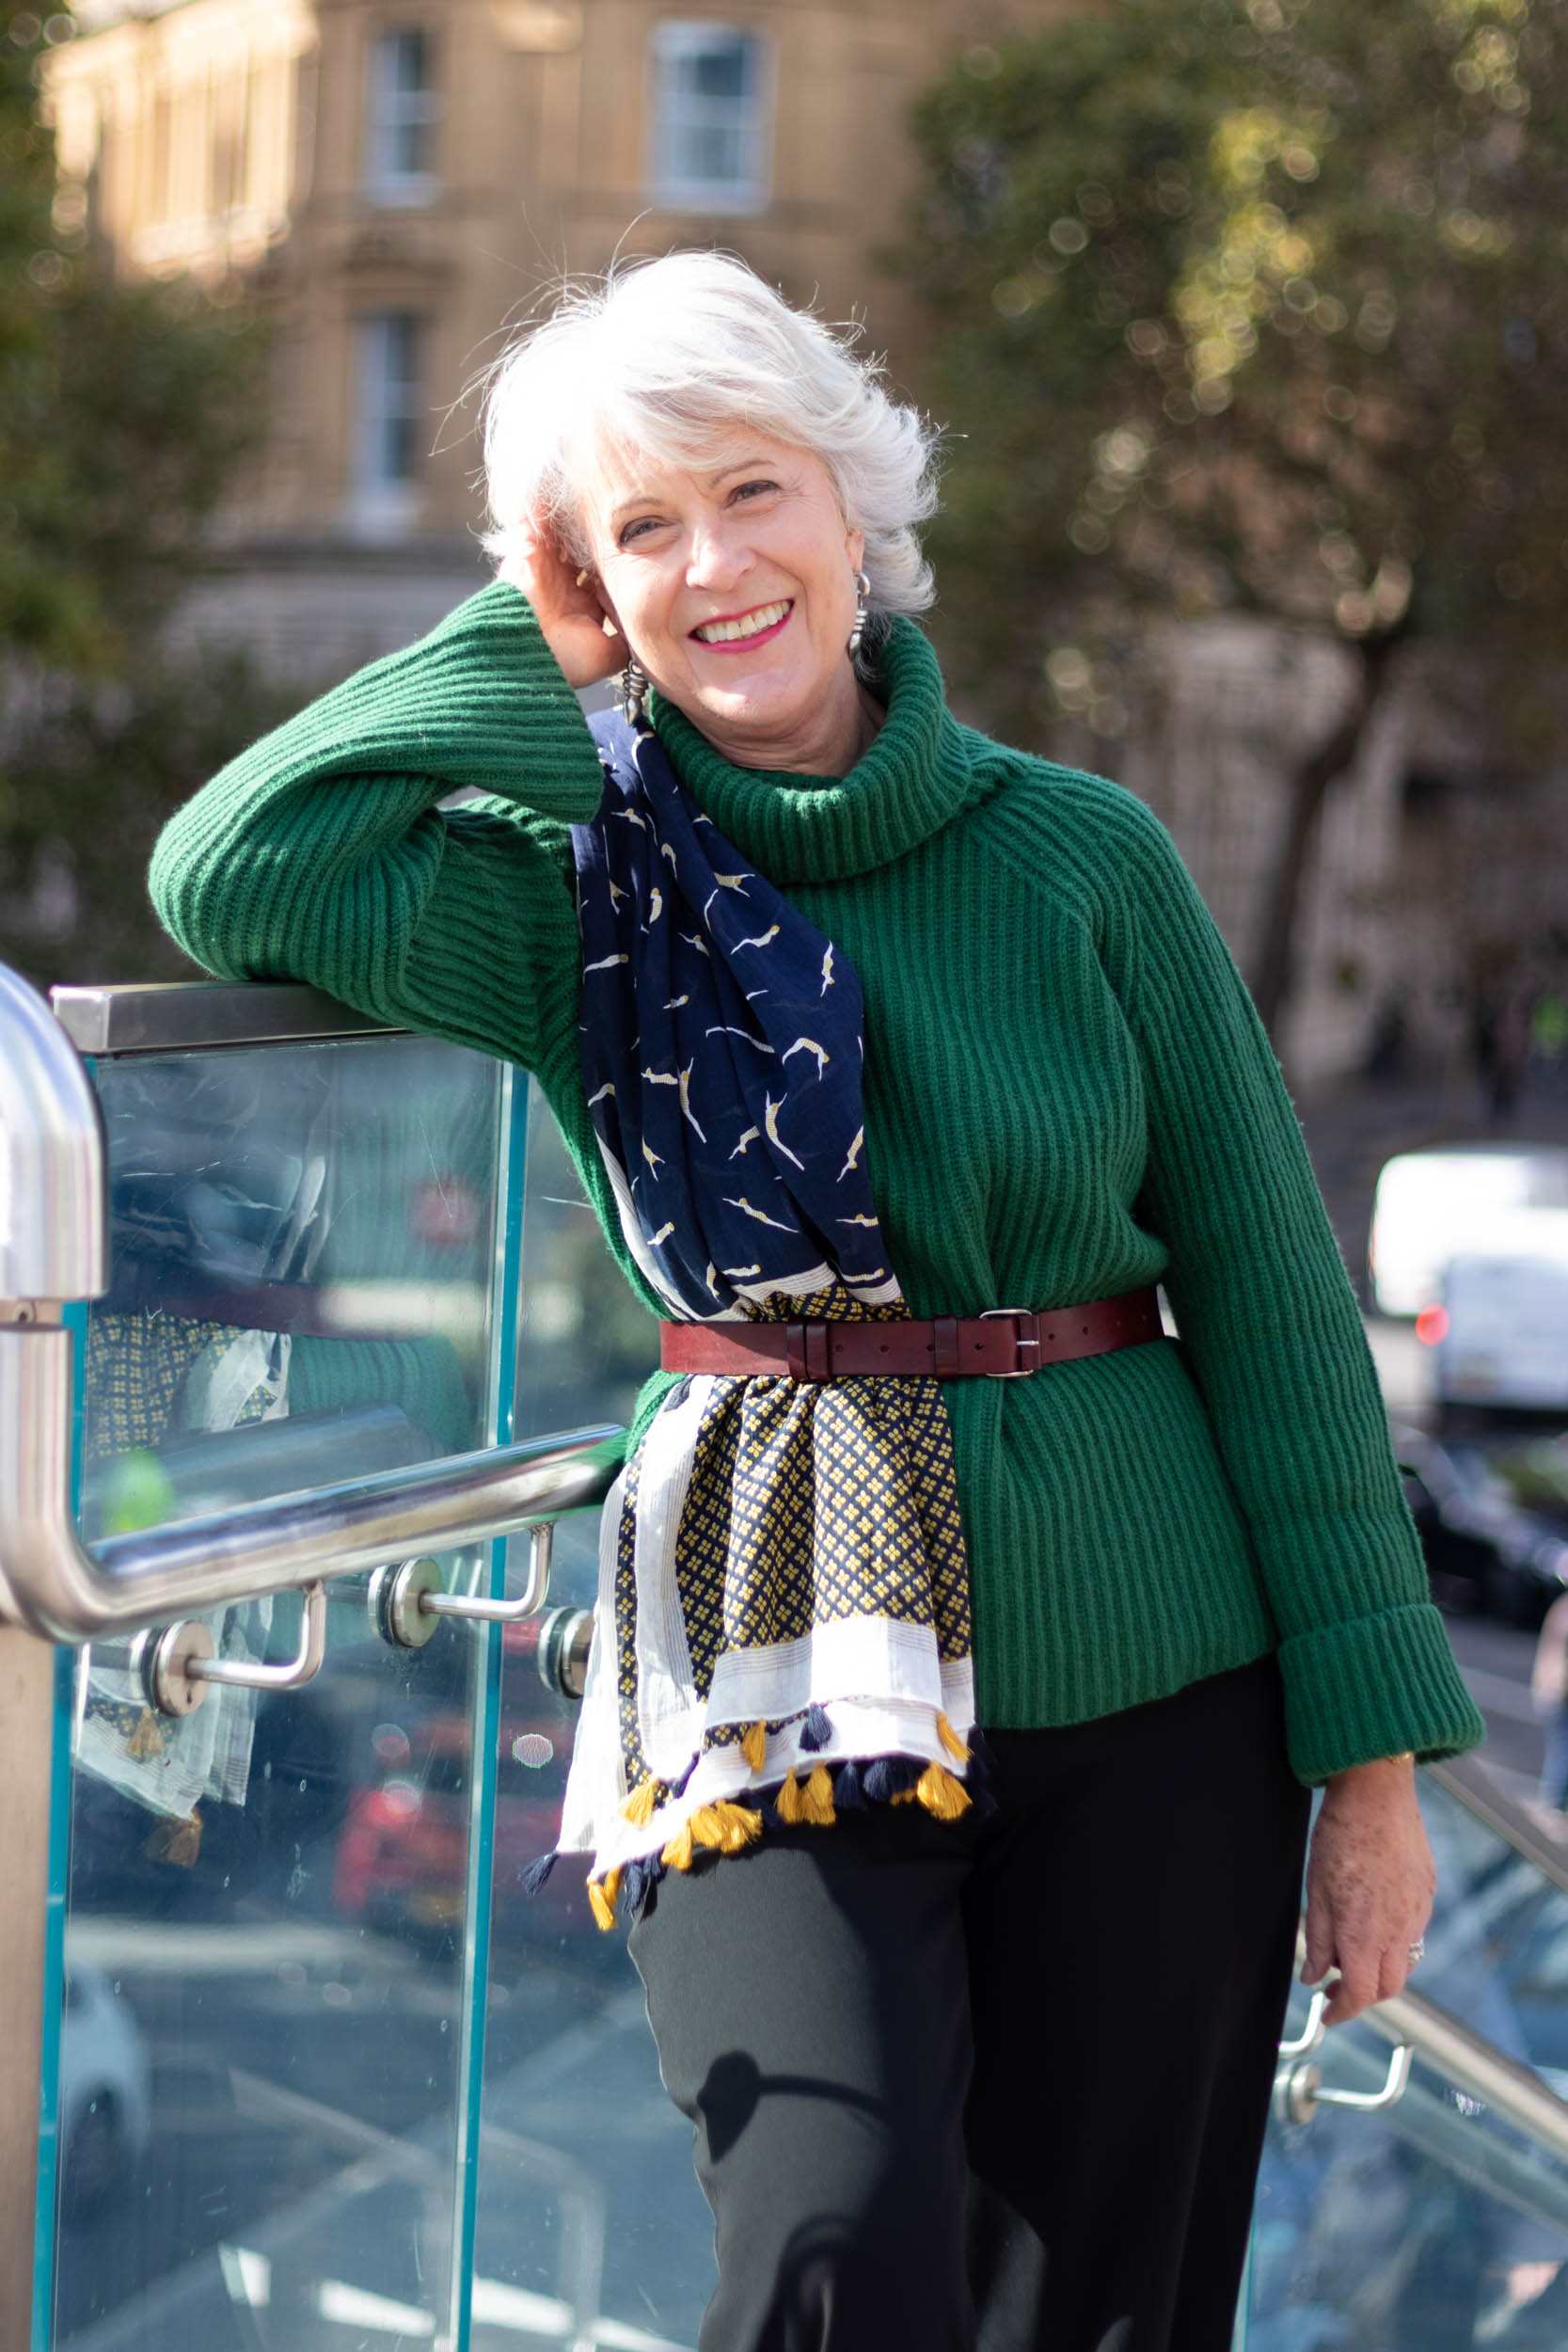 Green is back in fashion - Chic at any age